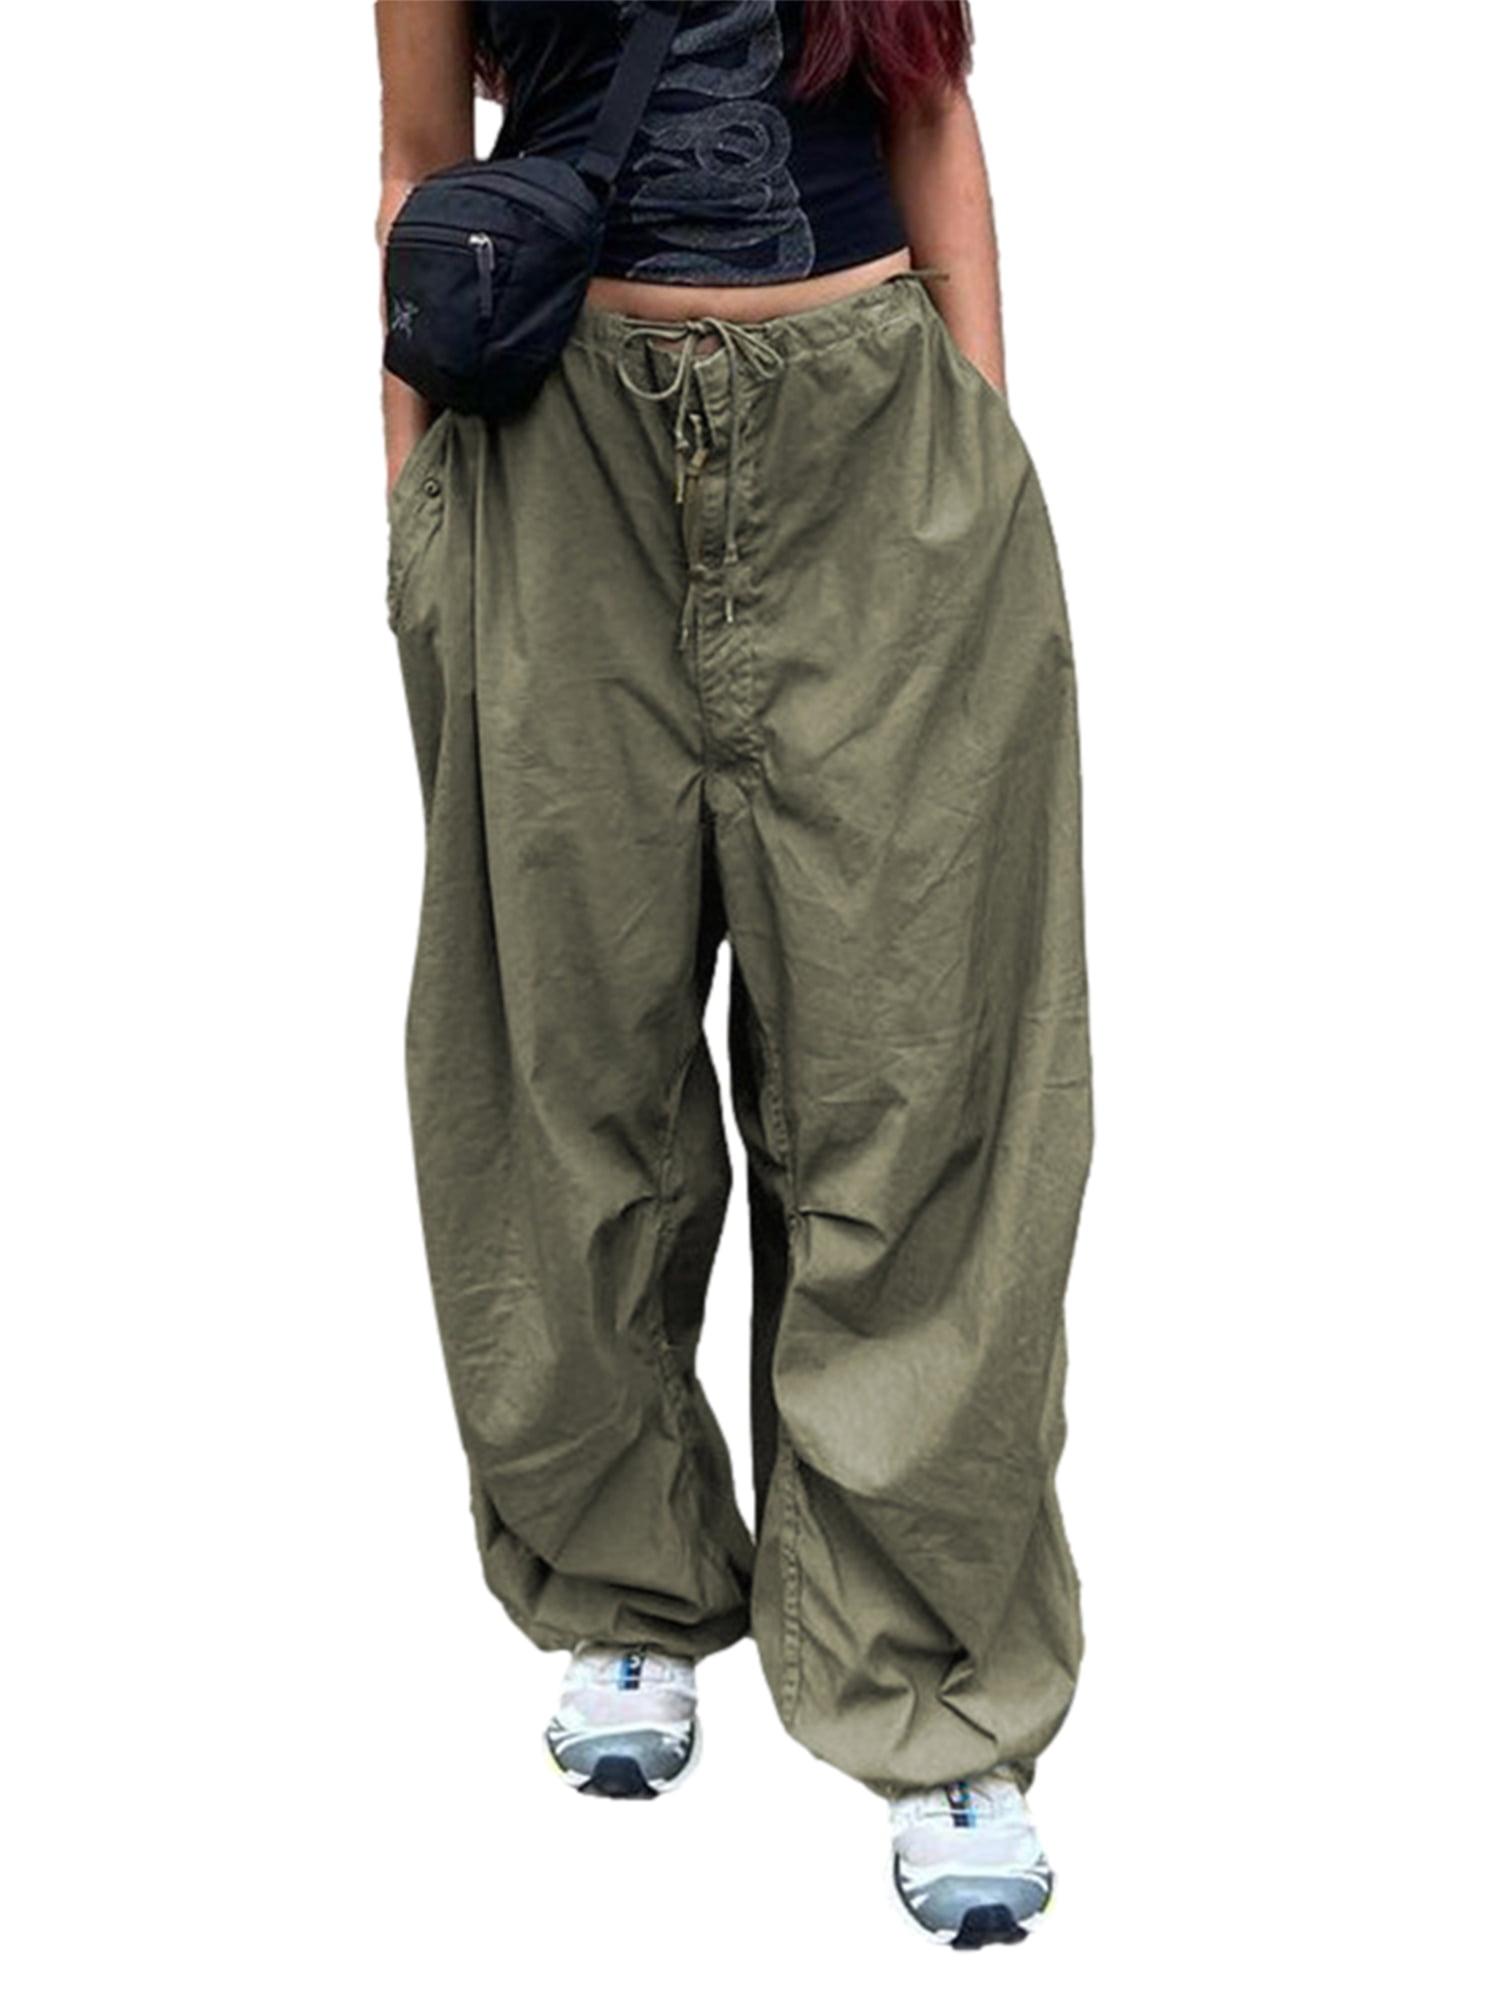 Women Casual Baggy Cargo Trousers Loose Oversized Hippie Punk